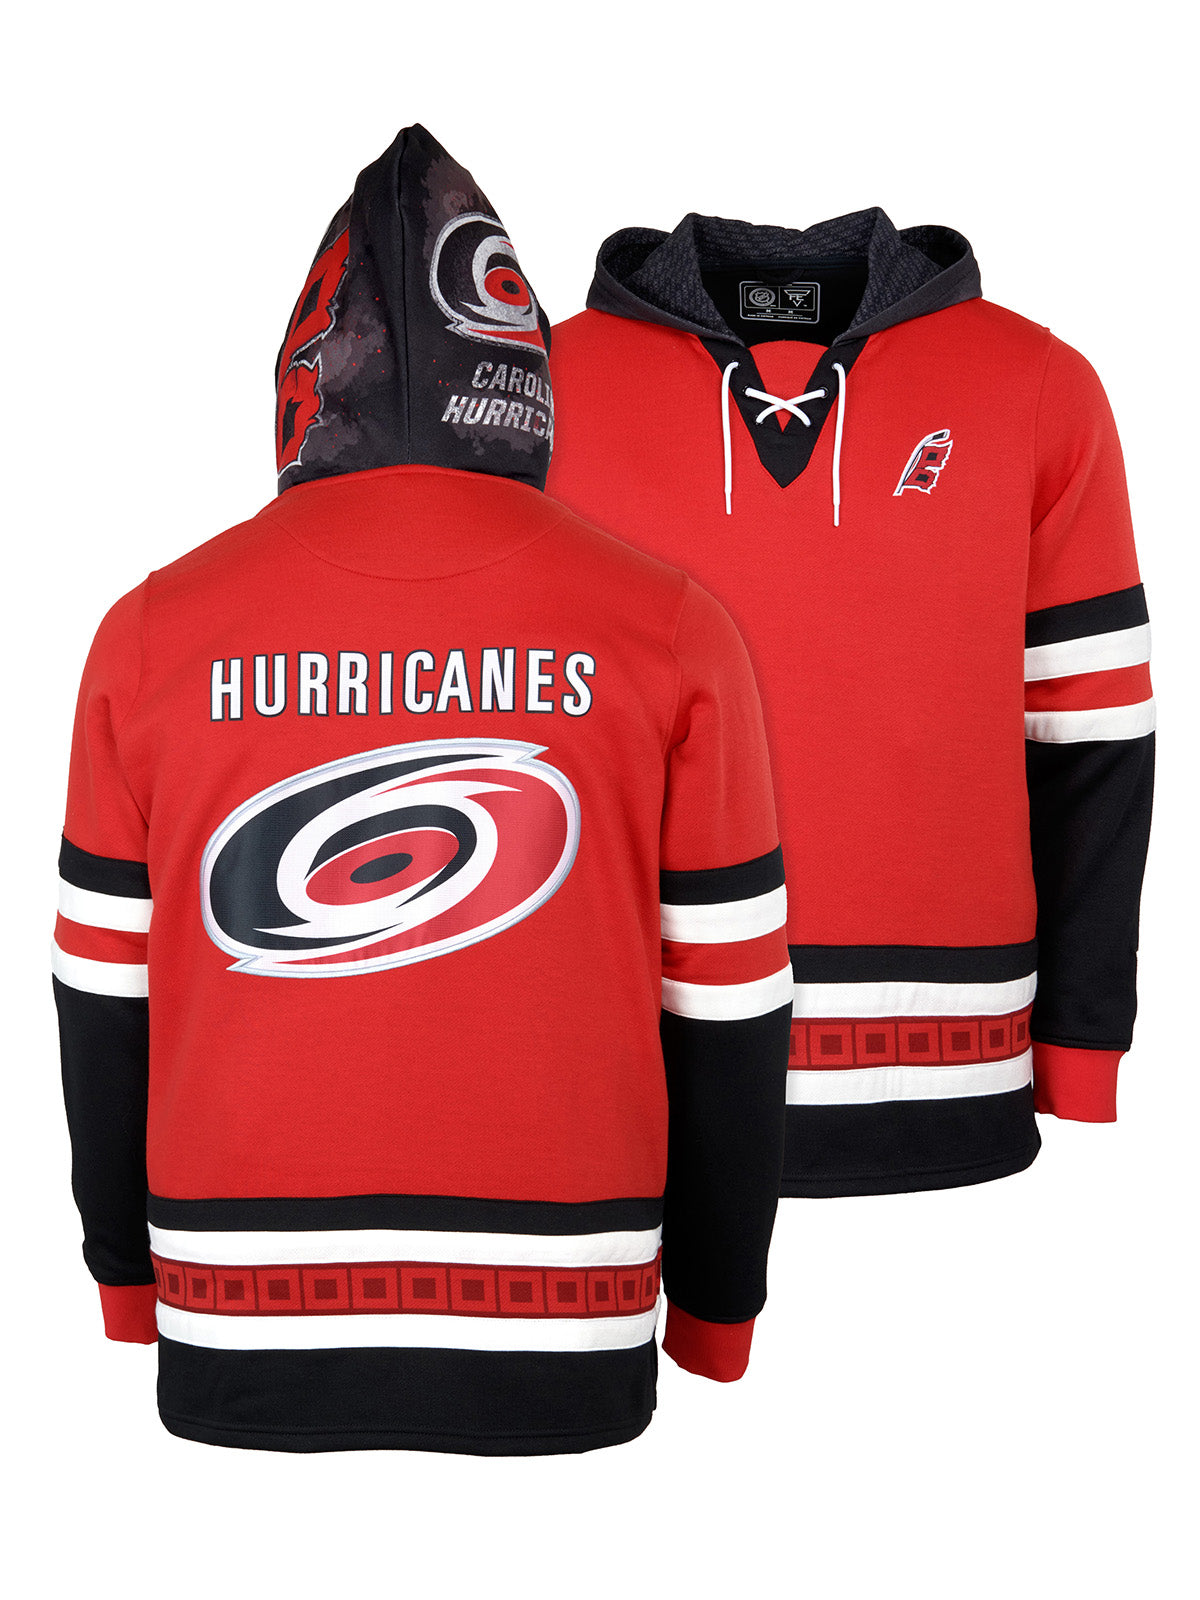 Carolina Hurricanes Lace-Up Hoodie - Hand drawn custom hood designs with all the team colors and craftmanship to replicate the gameday jersey of this NHL hoodie